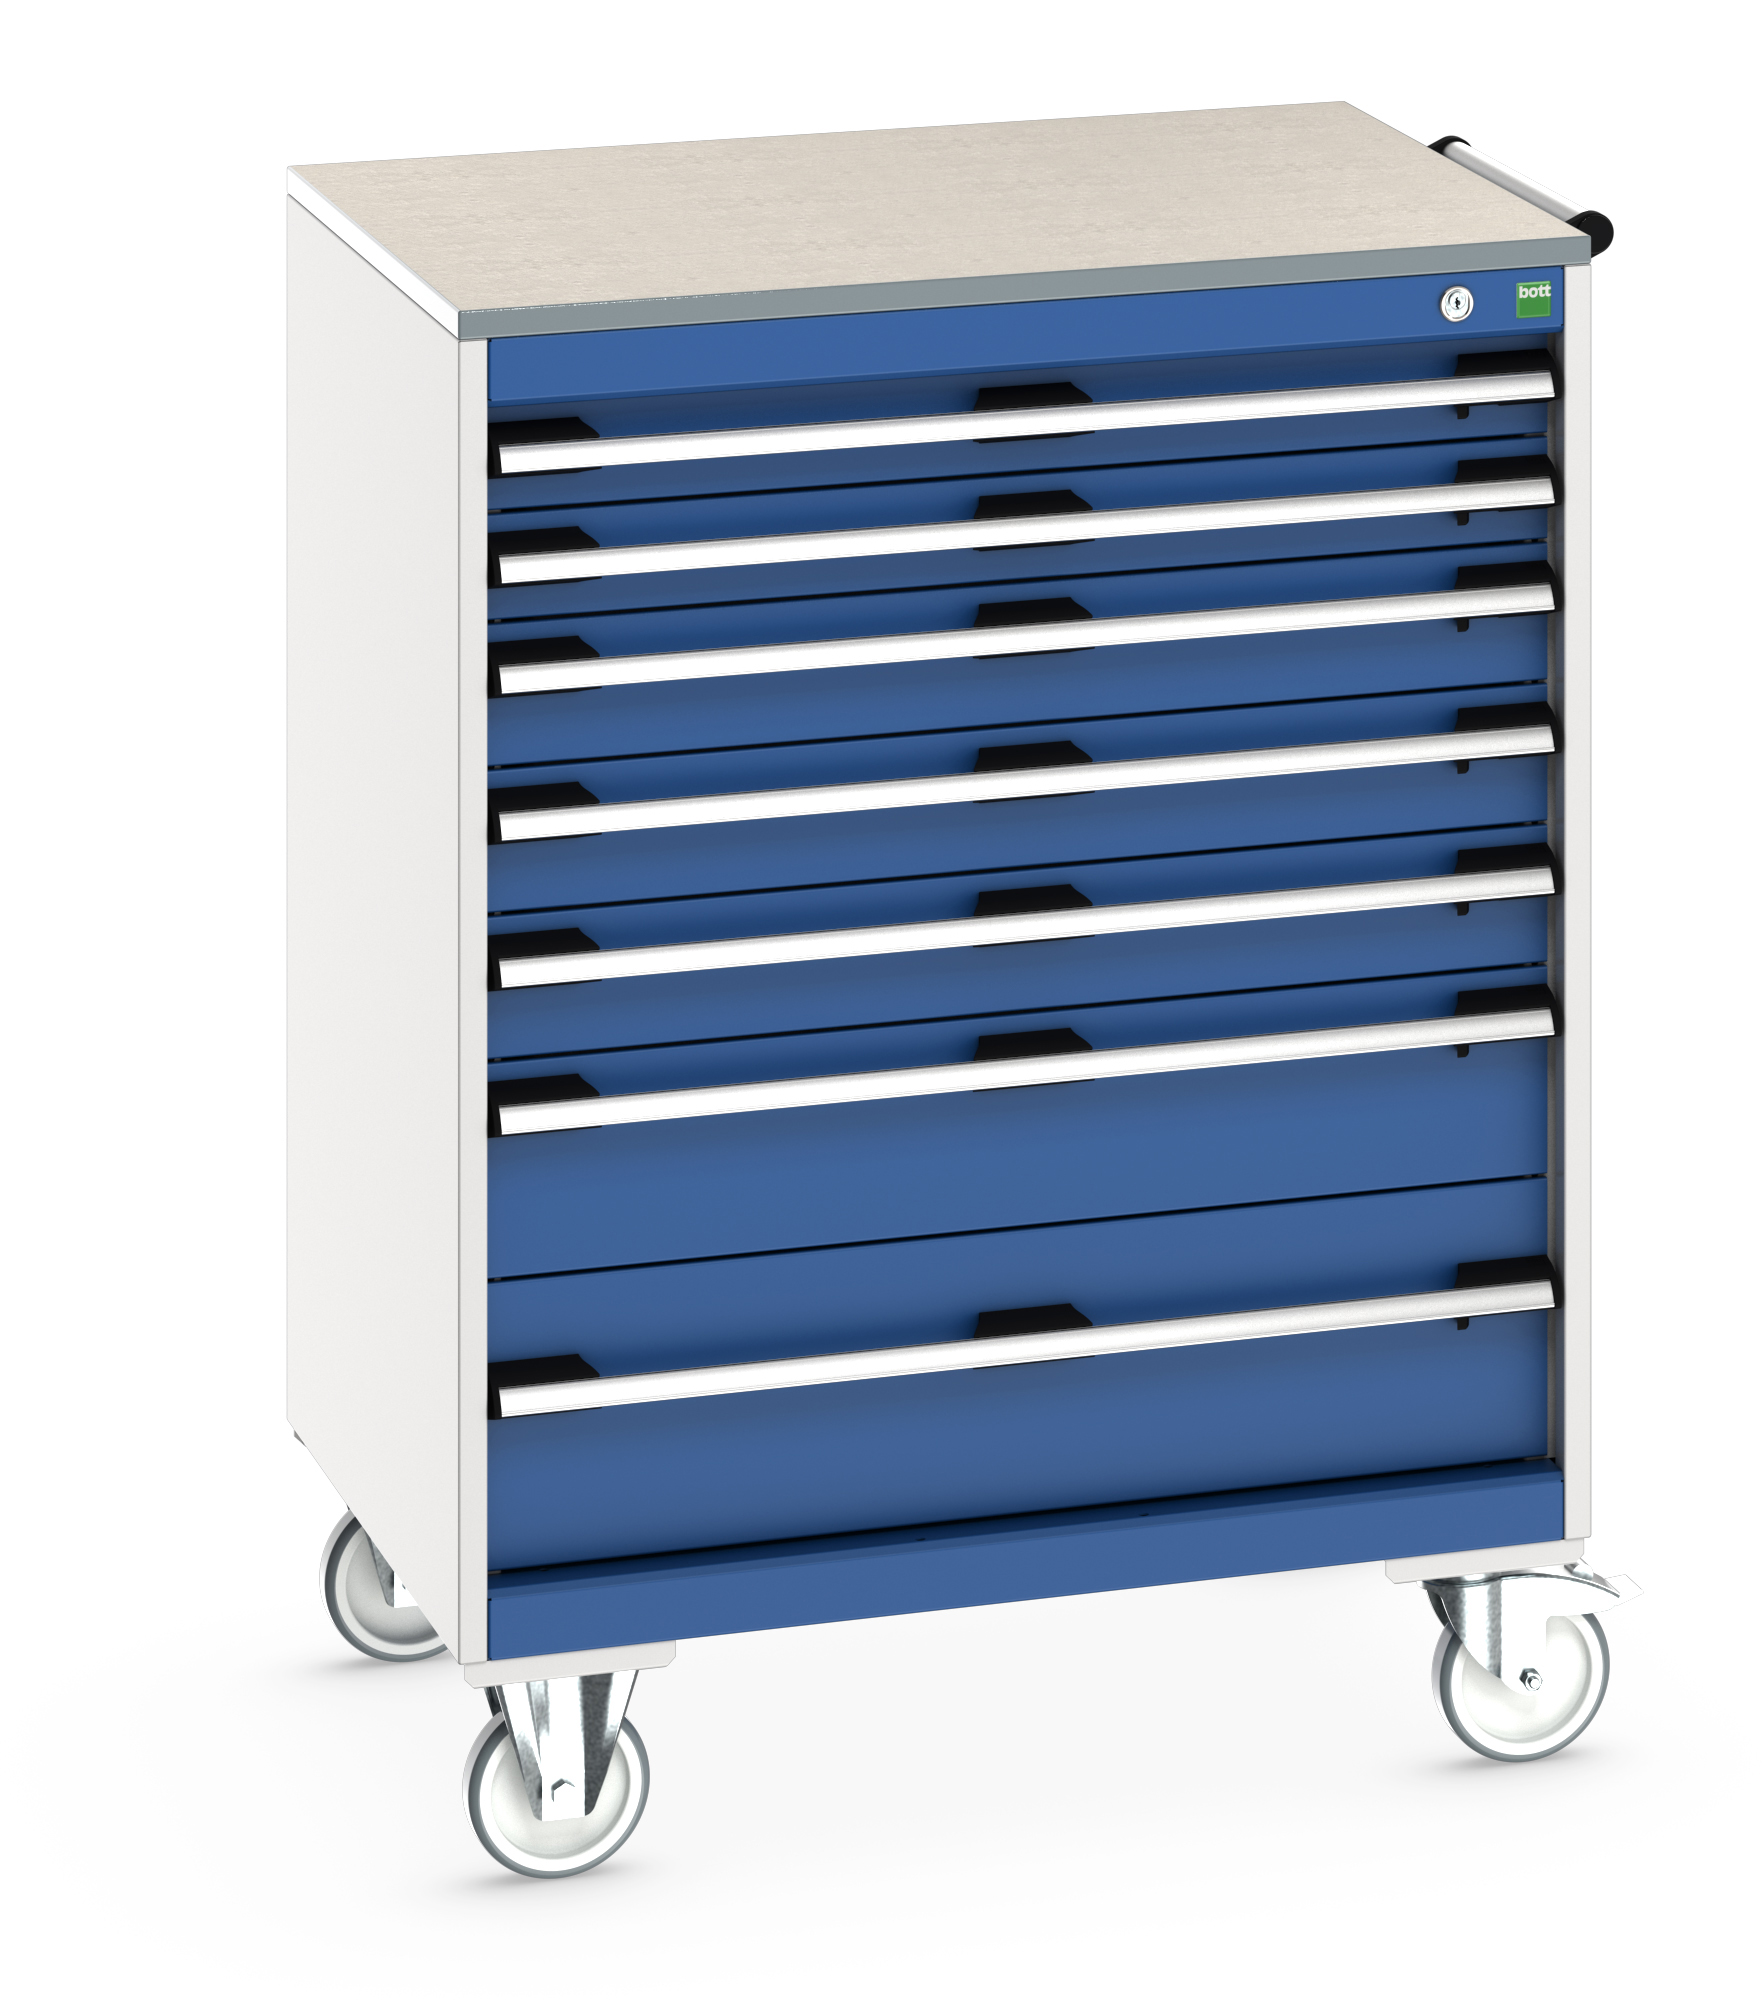 Bott Cubio Mobile Drawer Cabinet With 7 Drawers & Lino Worktop - 40402162.11V